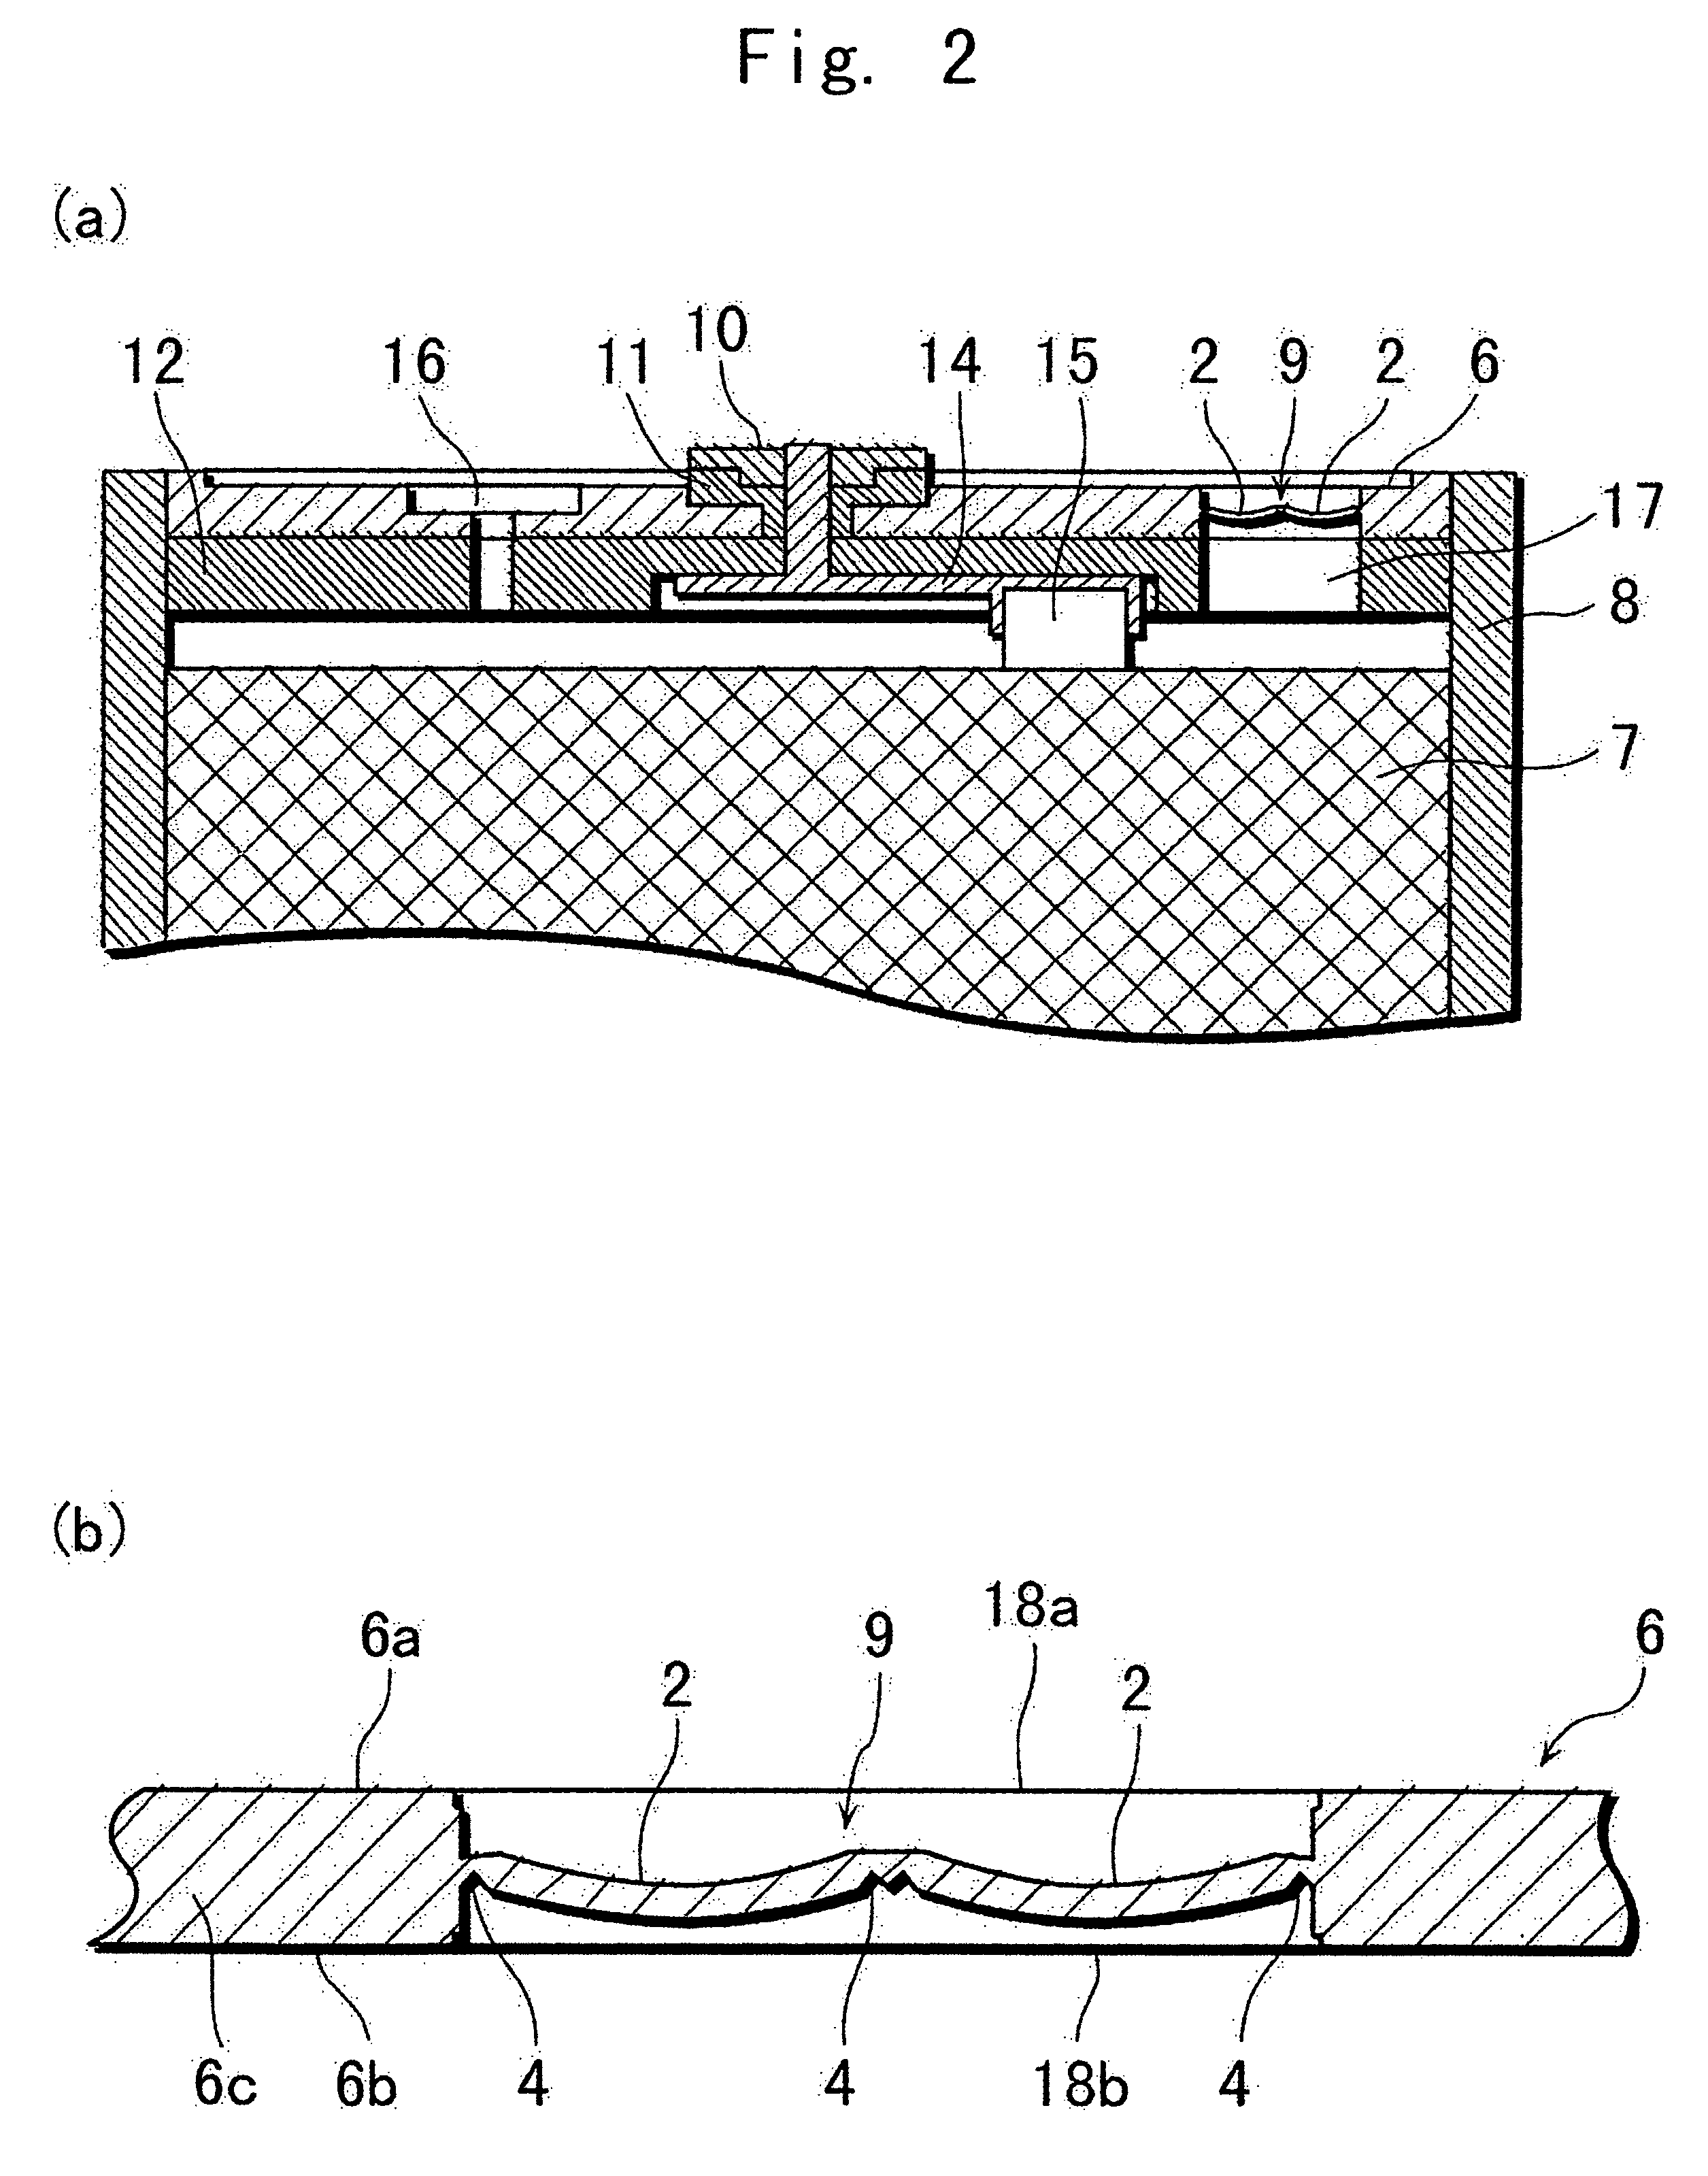 Sealed cell having non-resealable safety valve